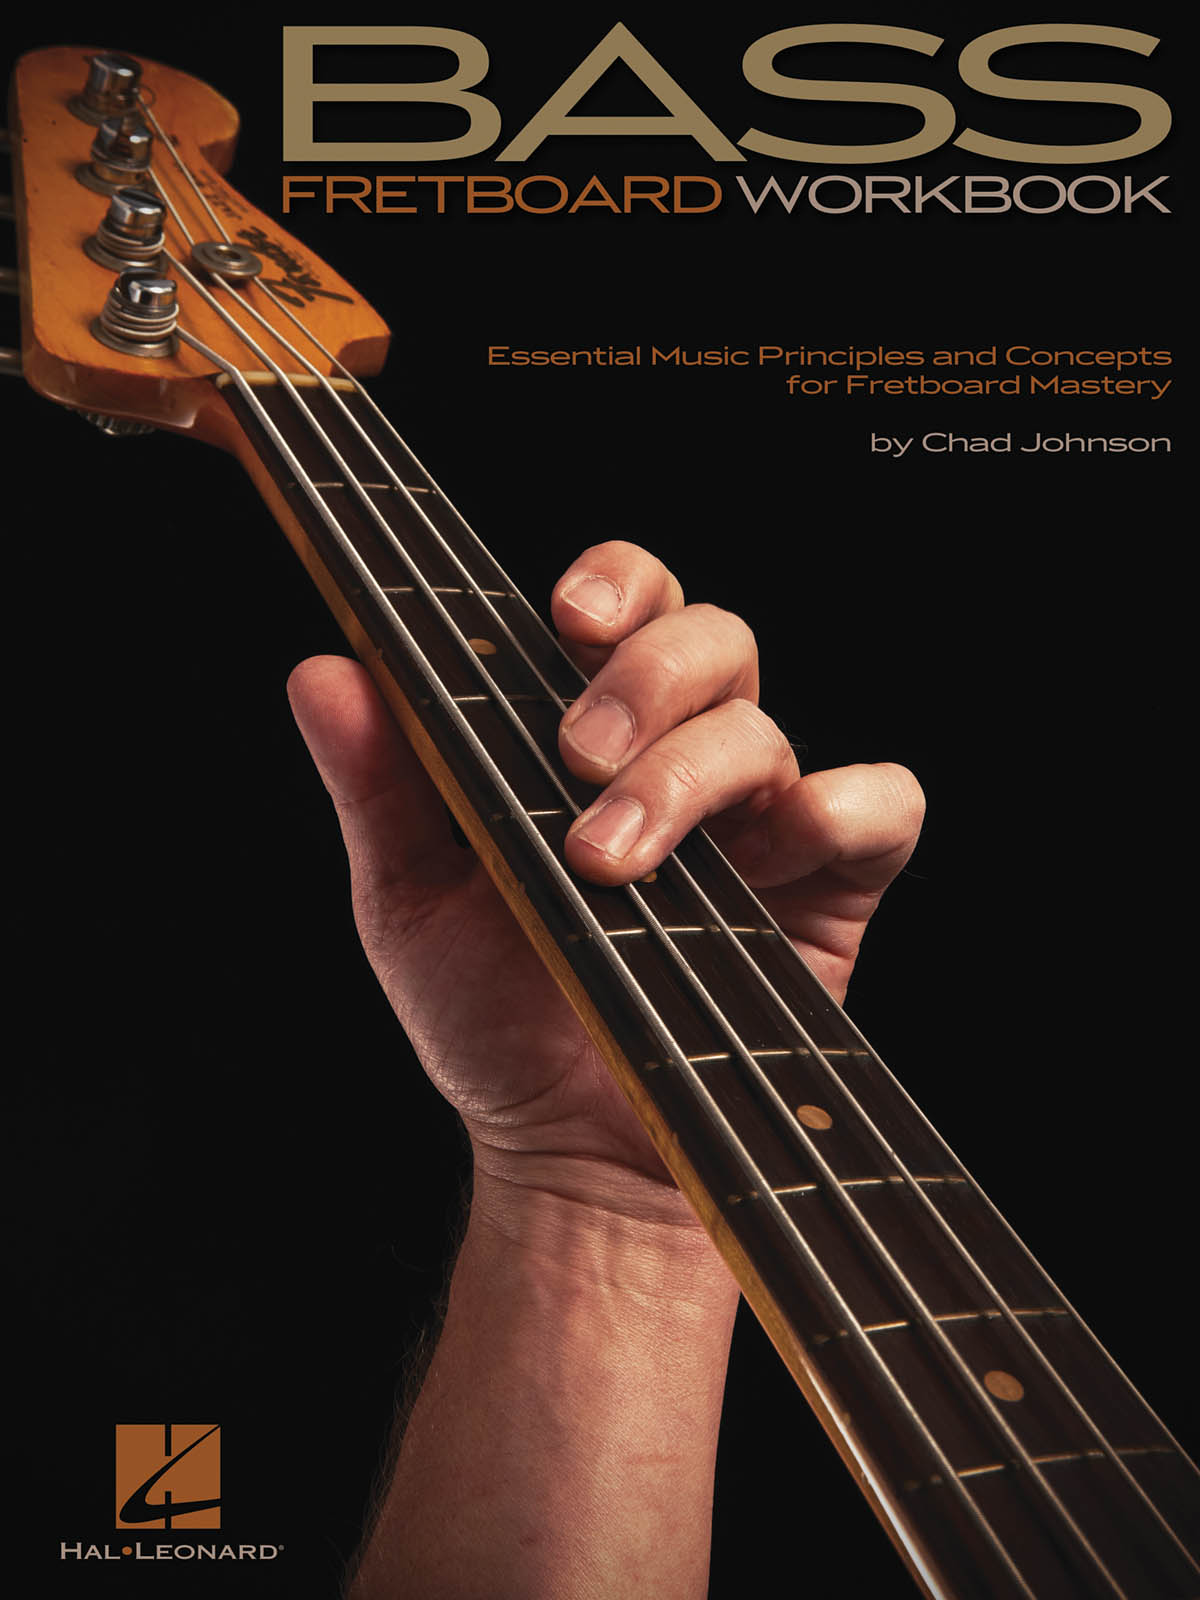 Bass Fretboard Workbook Essential Music Principles - Concepts for Fretboard Mastery - noty pro basovou kytaru